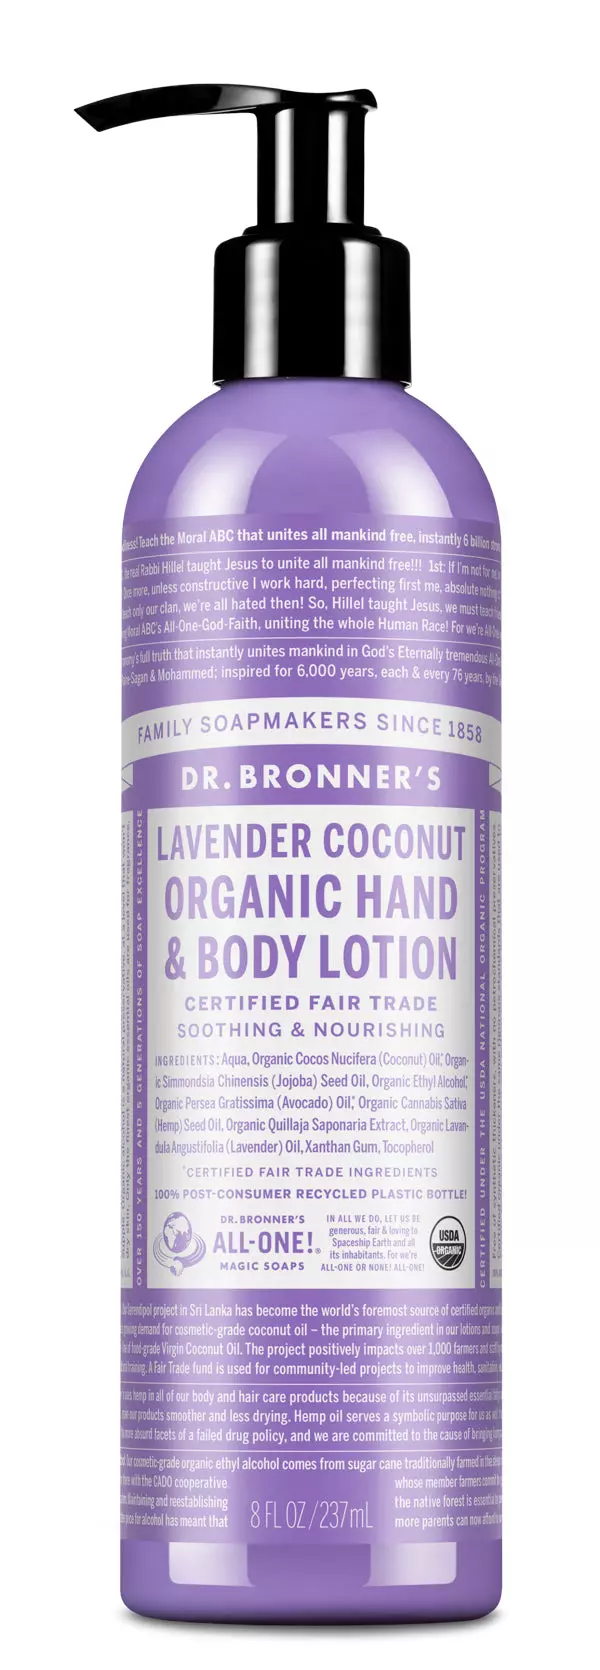 Dr. Bronner’s Lavender Coconut Organic Hand & Body Lotion